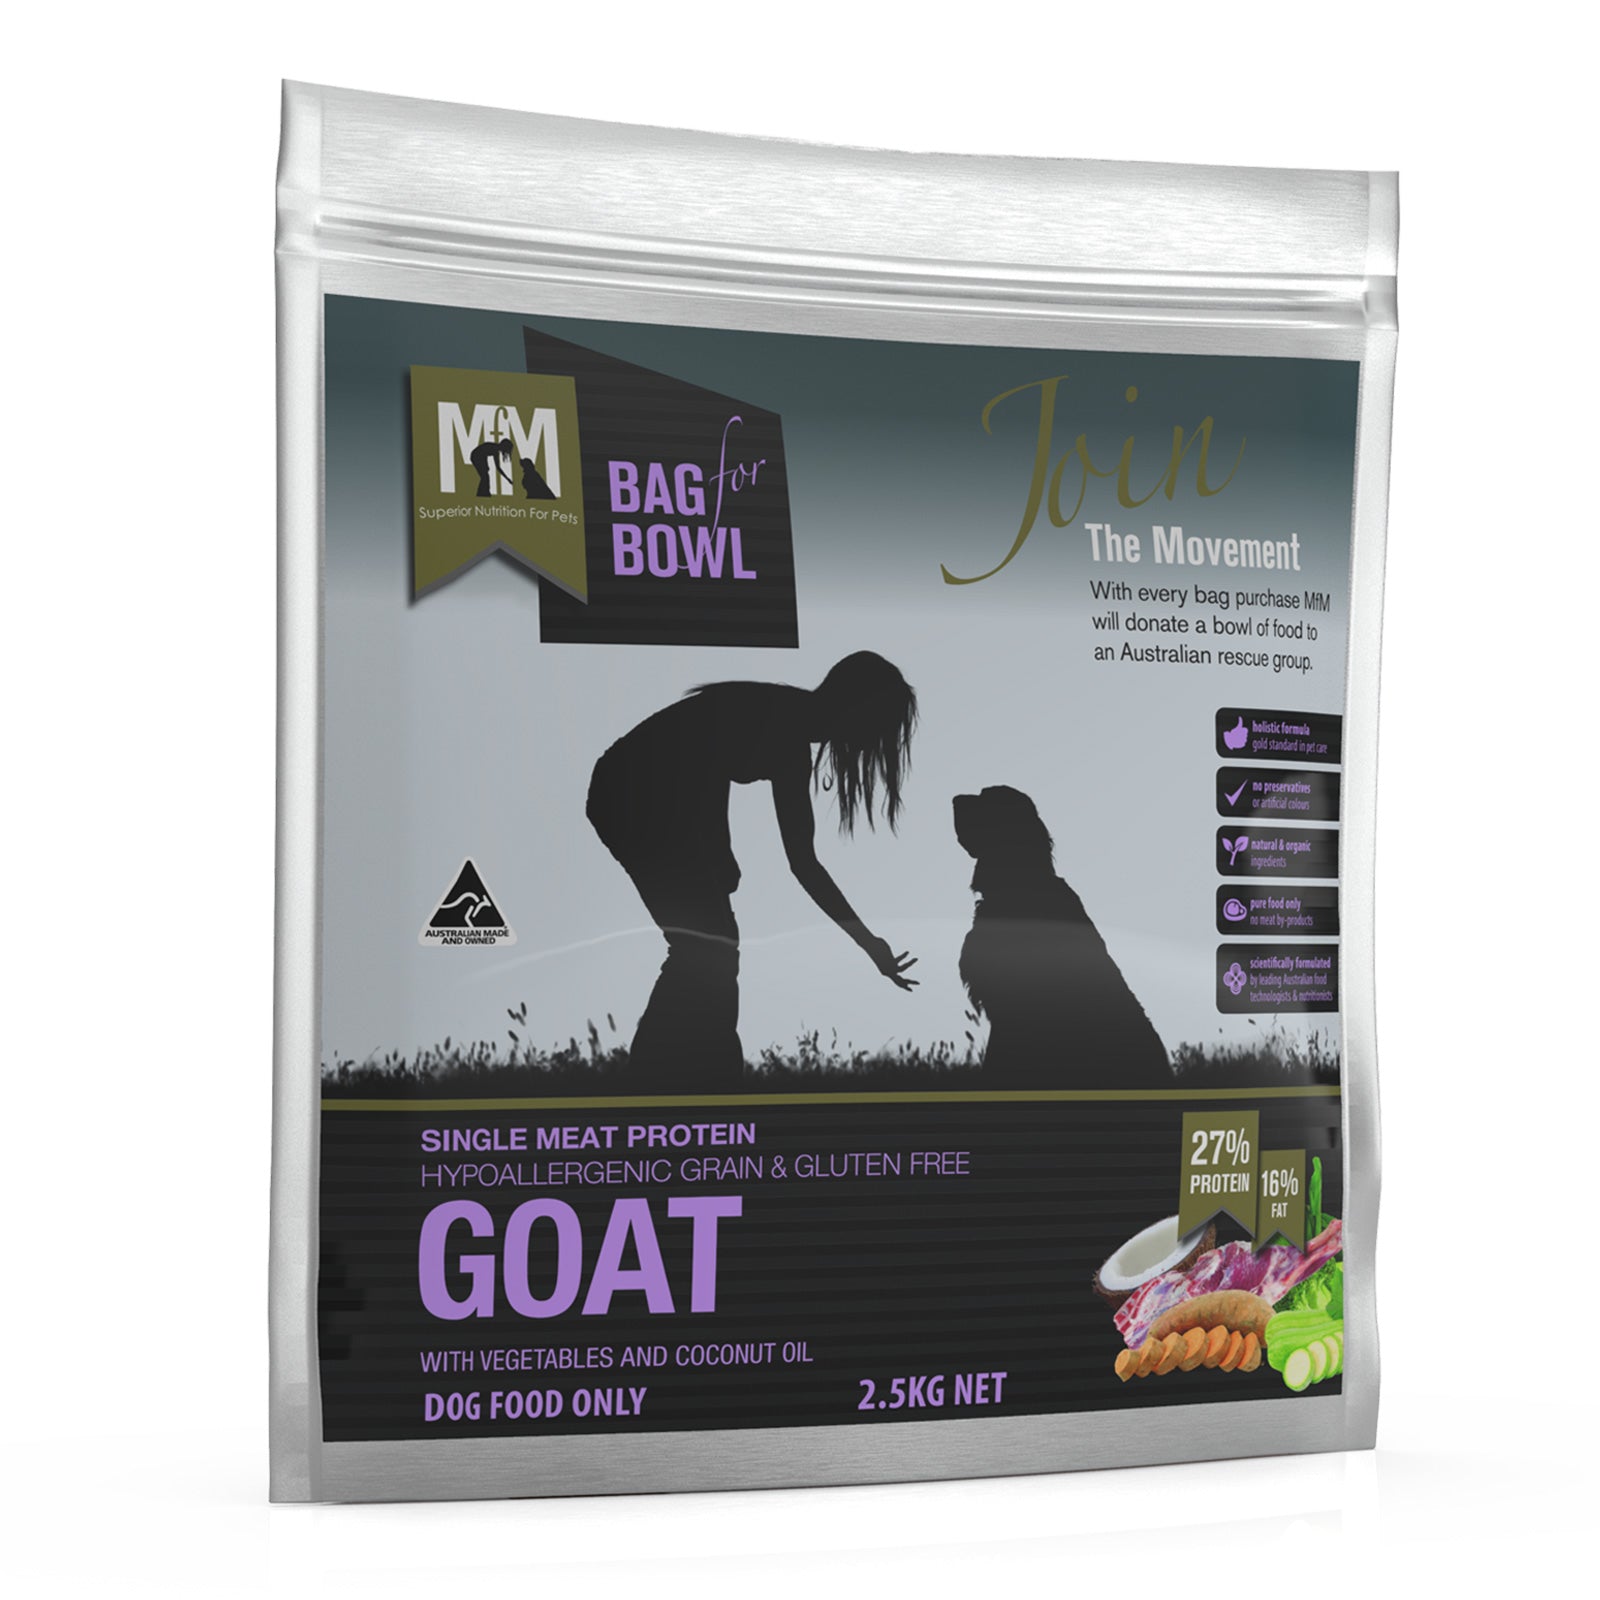 Meals for Mutts Single Protein Goat Gluten Free Grain Free Dog Food